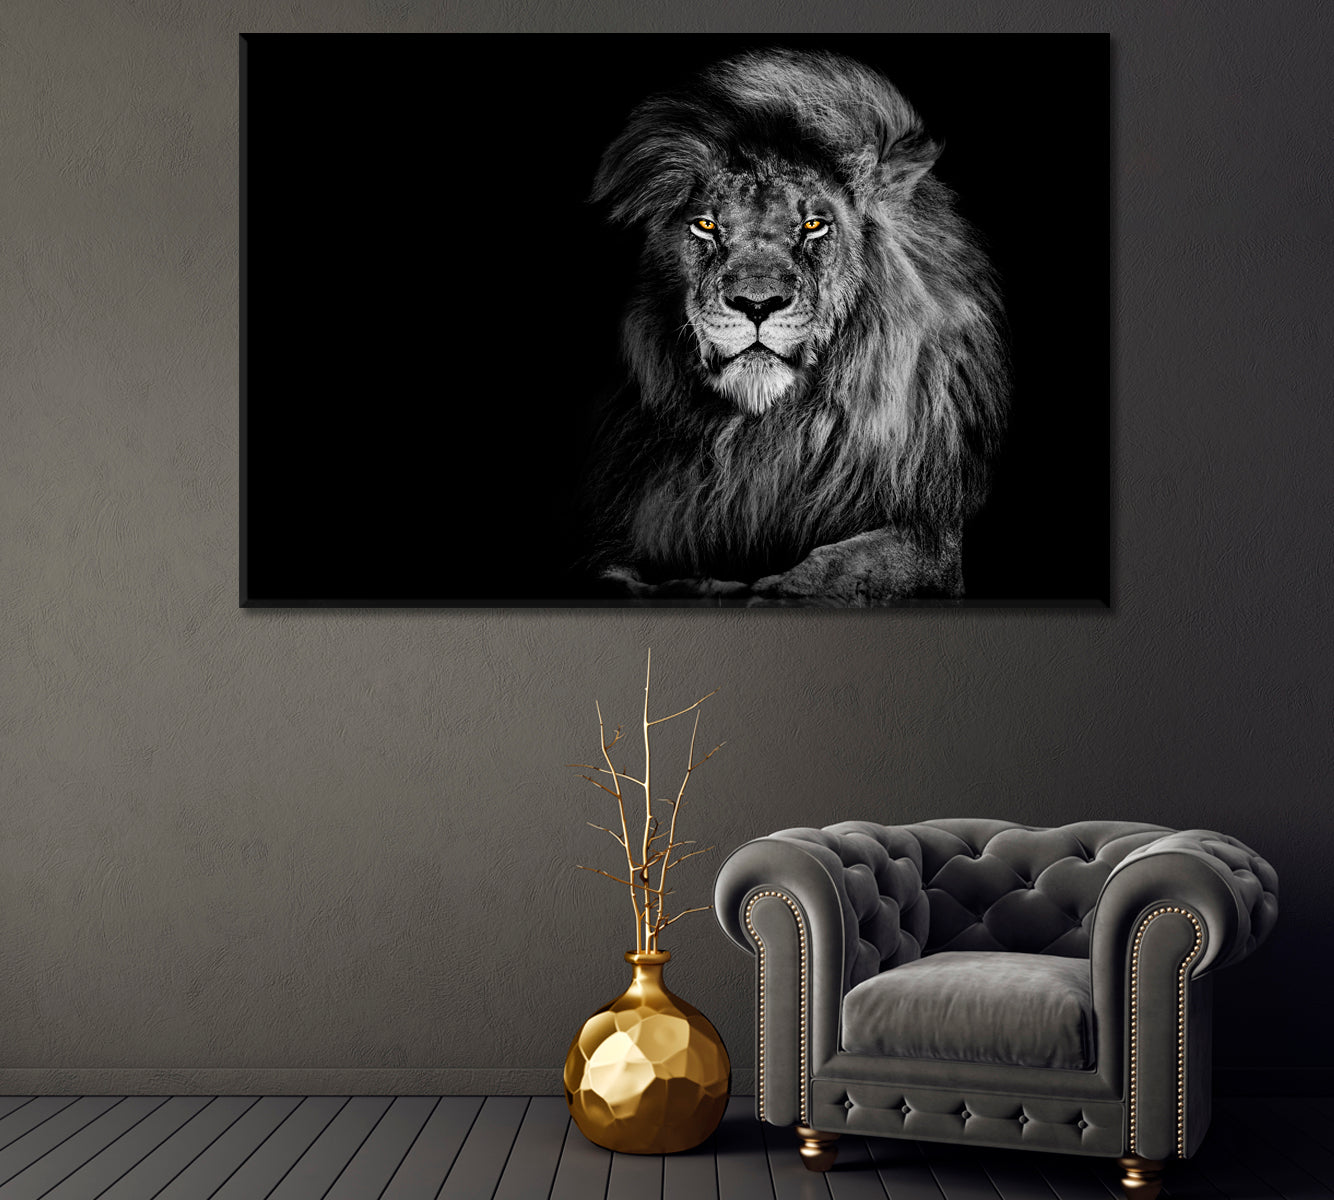 Lion King in Black and White Art Canvas Print-Canvas Print-CetArt-1 Panel-24x16 inches-CetArt